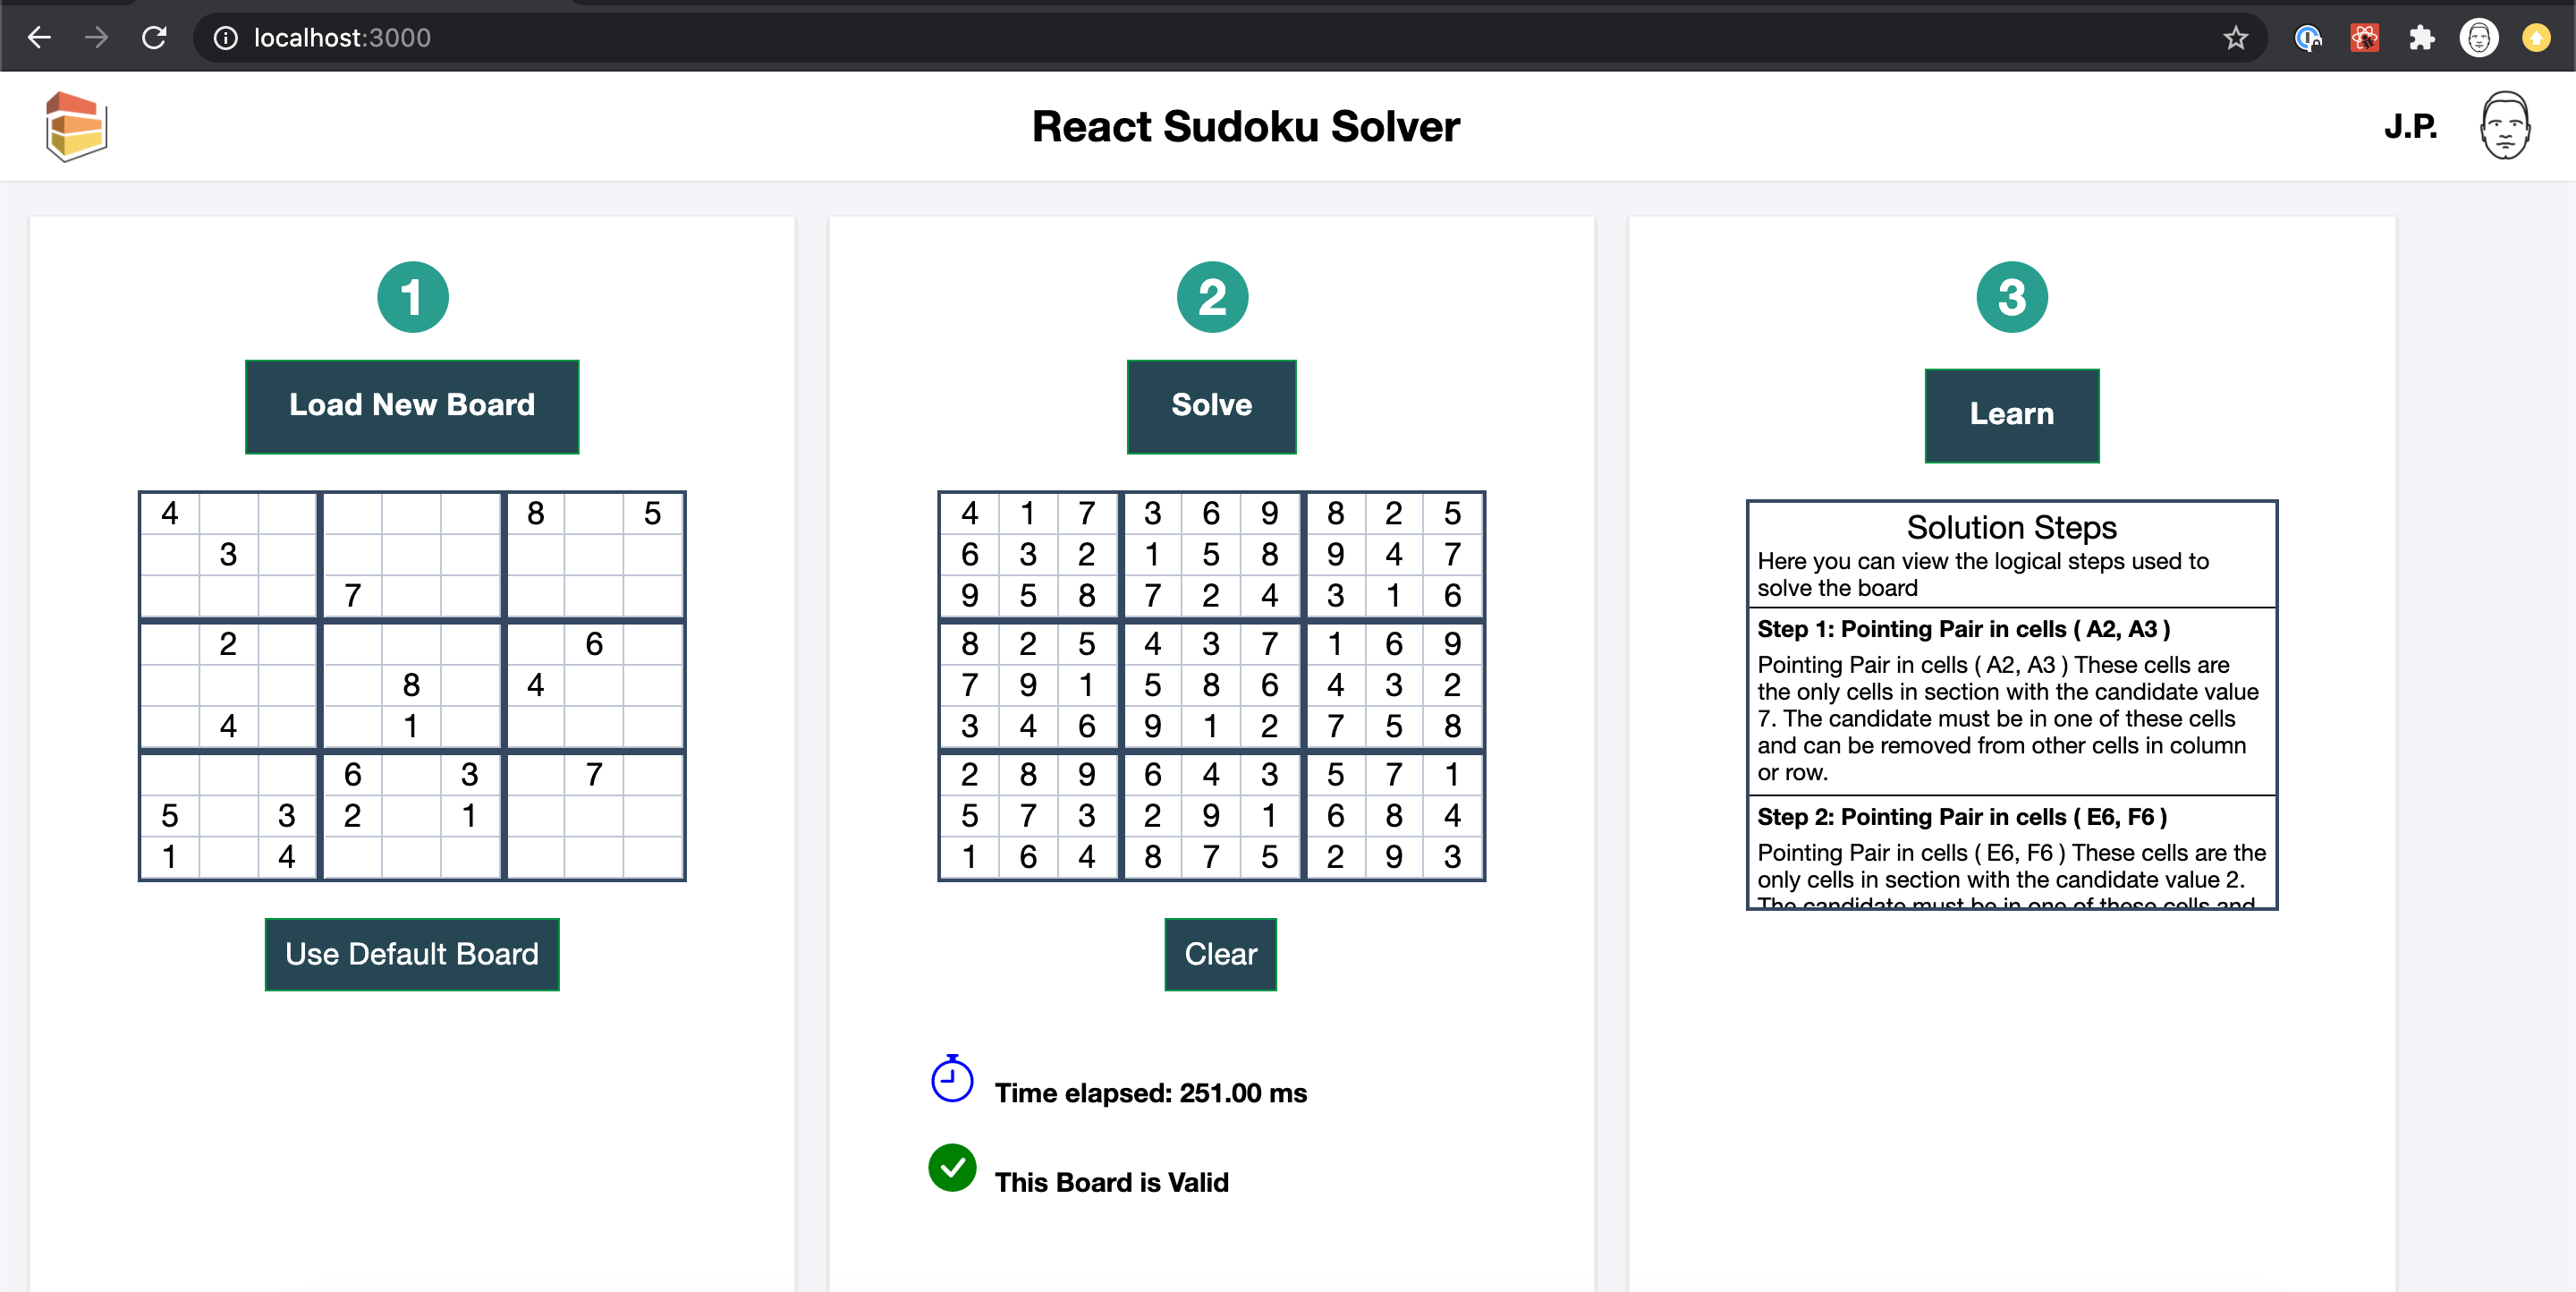 Building a React app to solve every Sudoku puzzle | by J. P. Solano | Medium